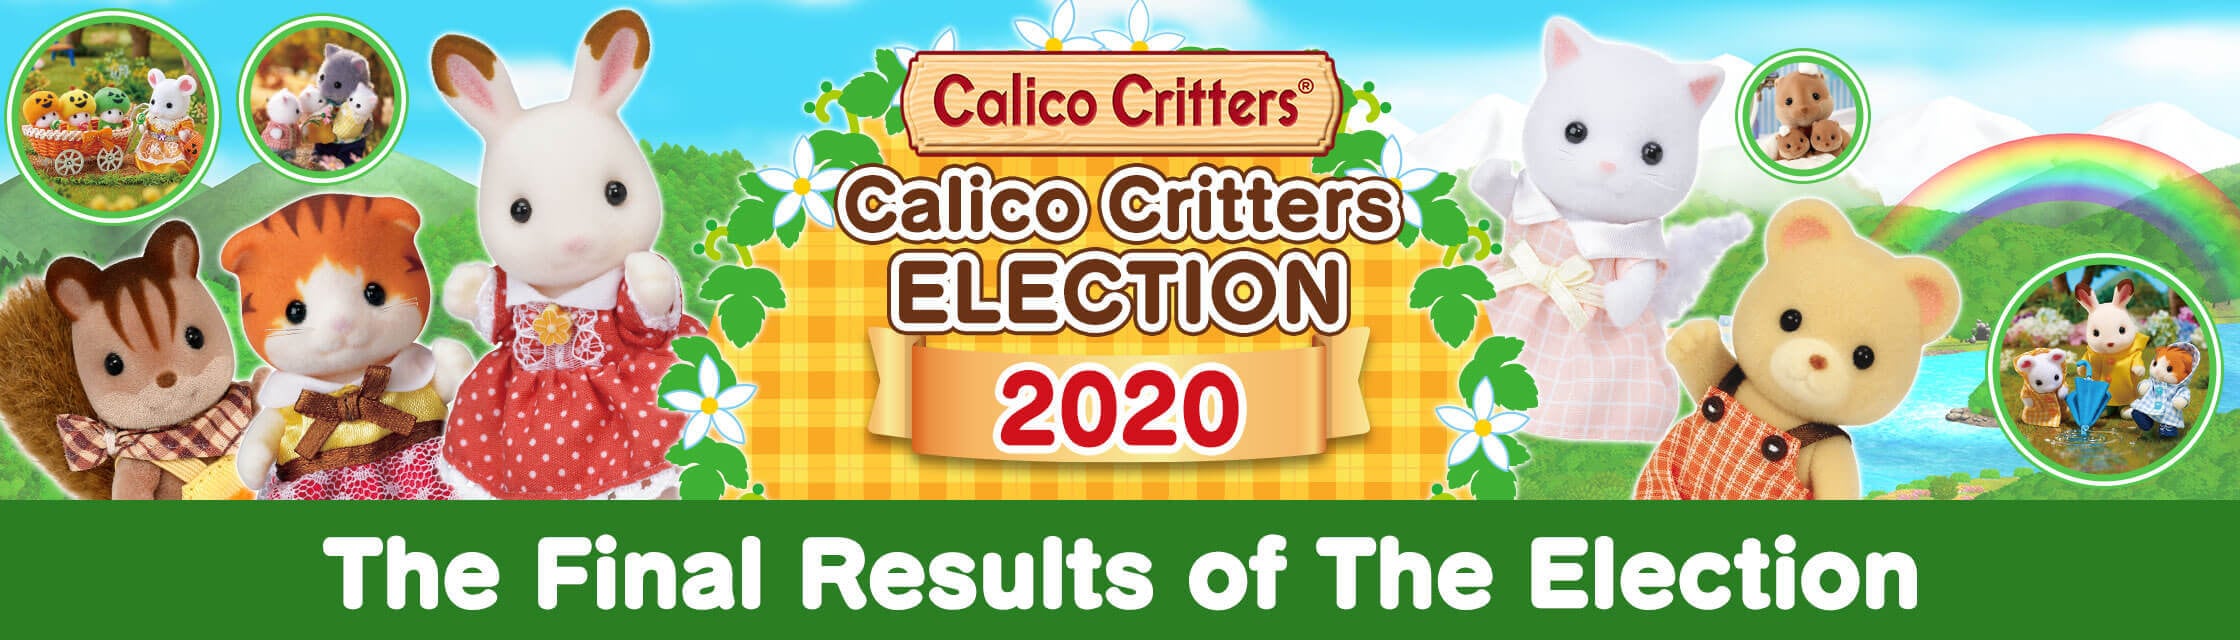 Calico Critters 2020 Election!